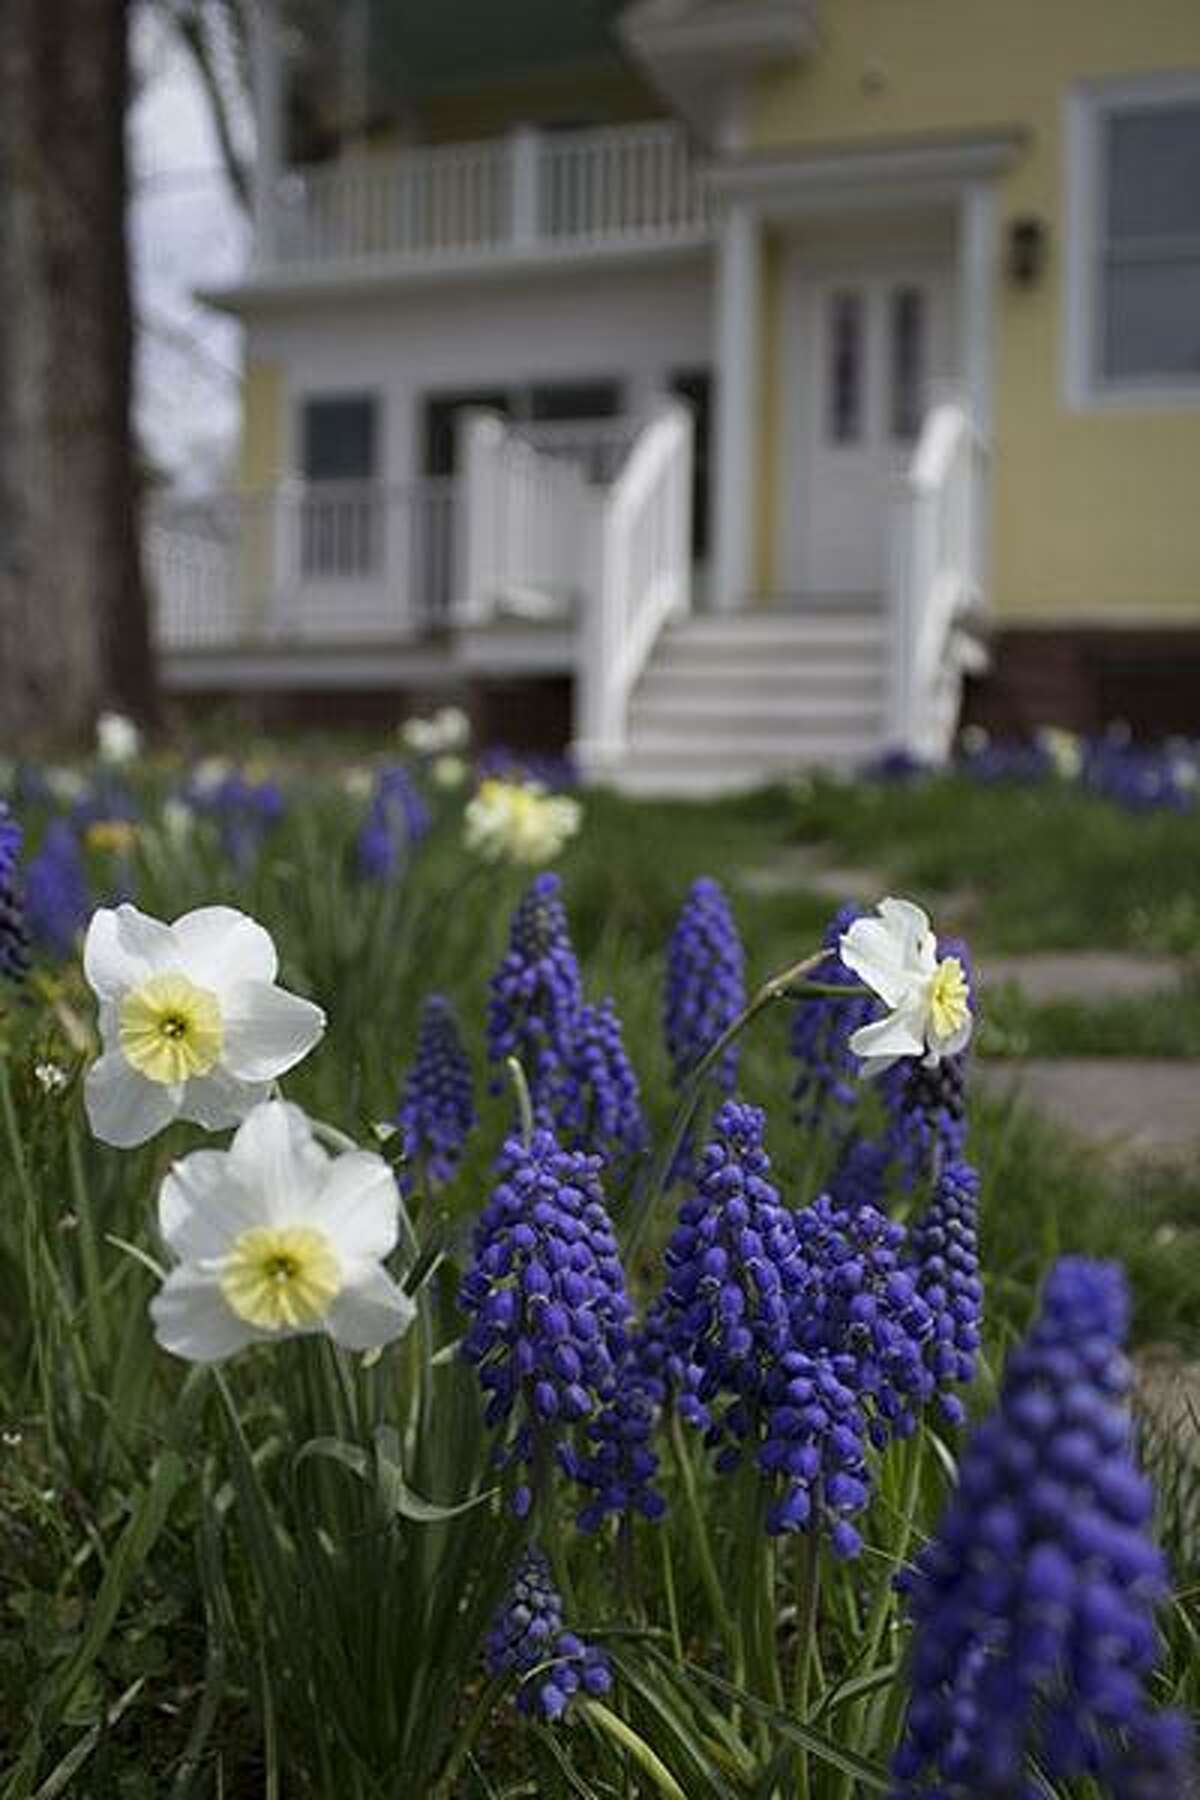 Colorblends House & Spring Garden in Bridgeport will be open to the public Saturday through May 14. The garden will be open dawn to dusk free of charge. Find out more. 